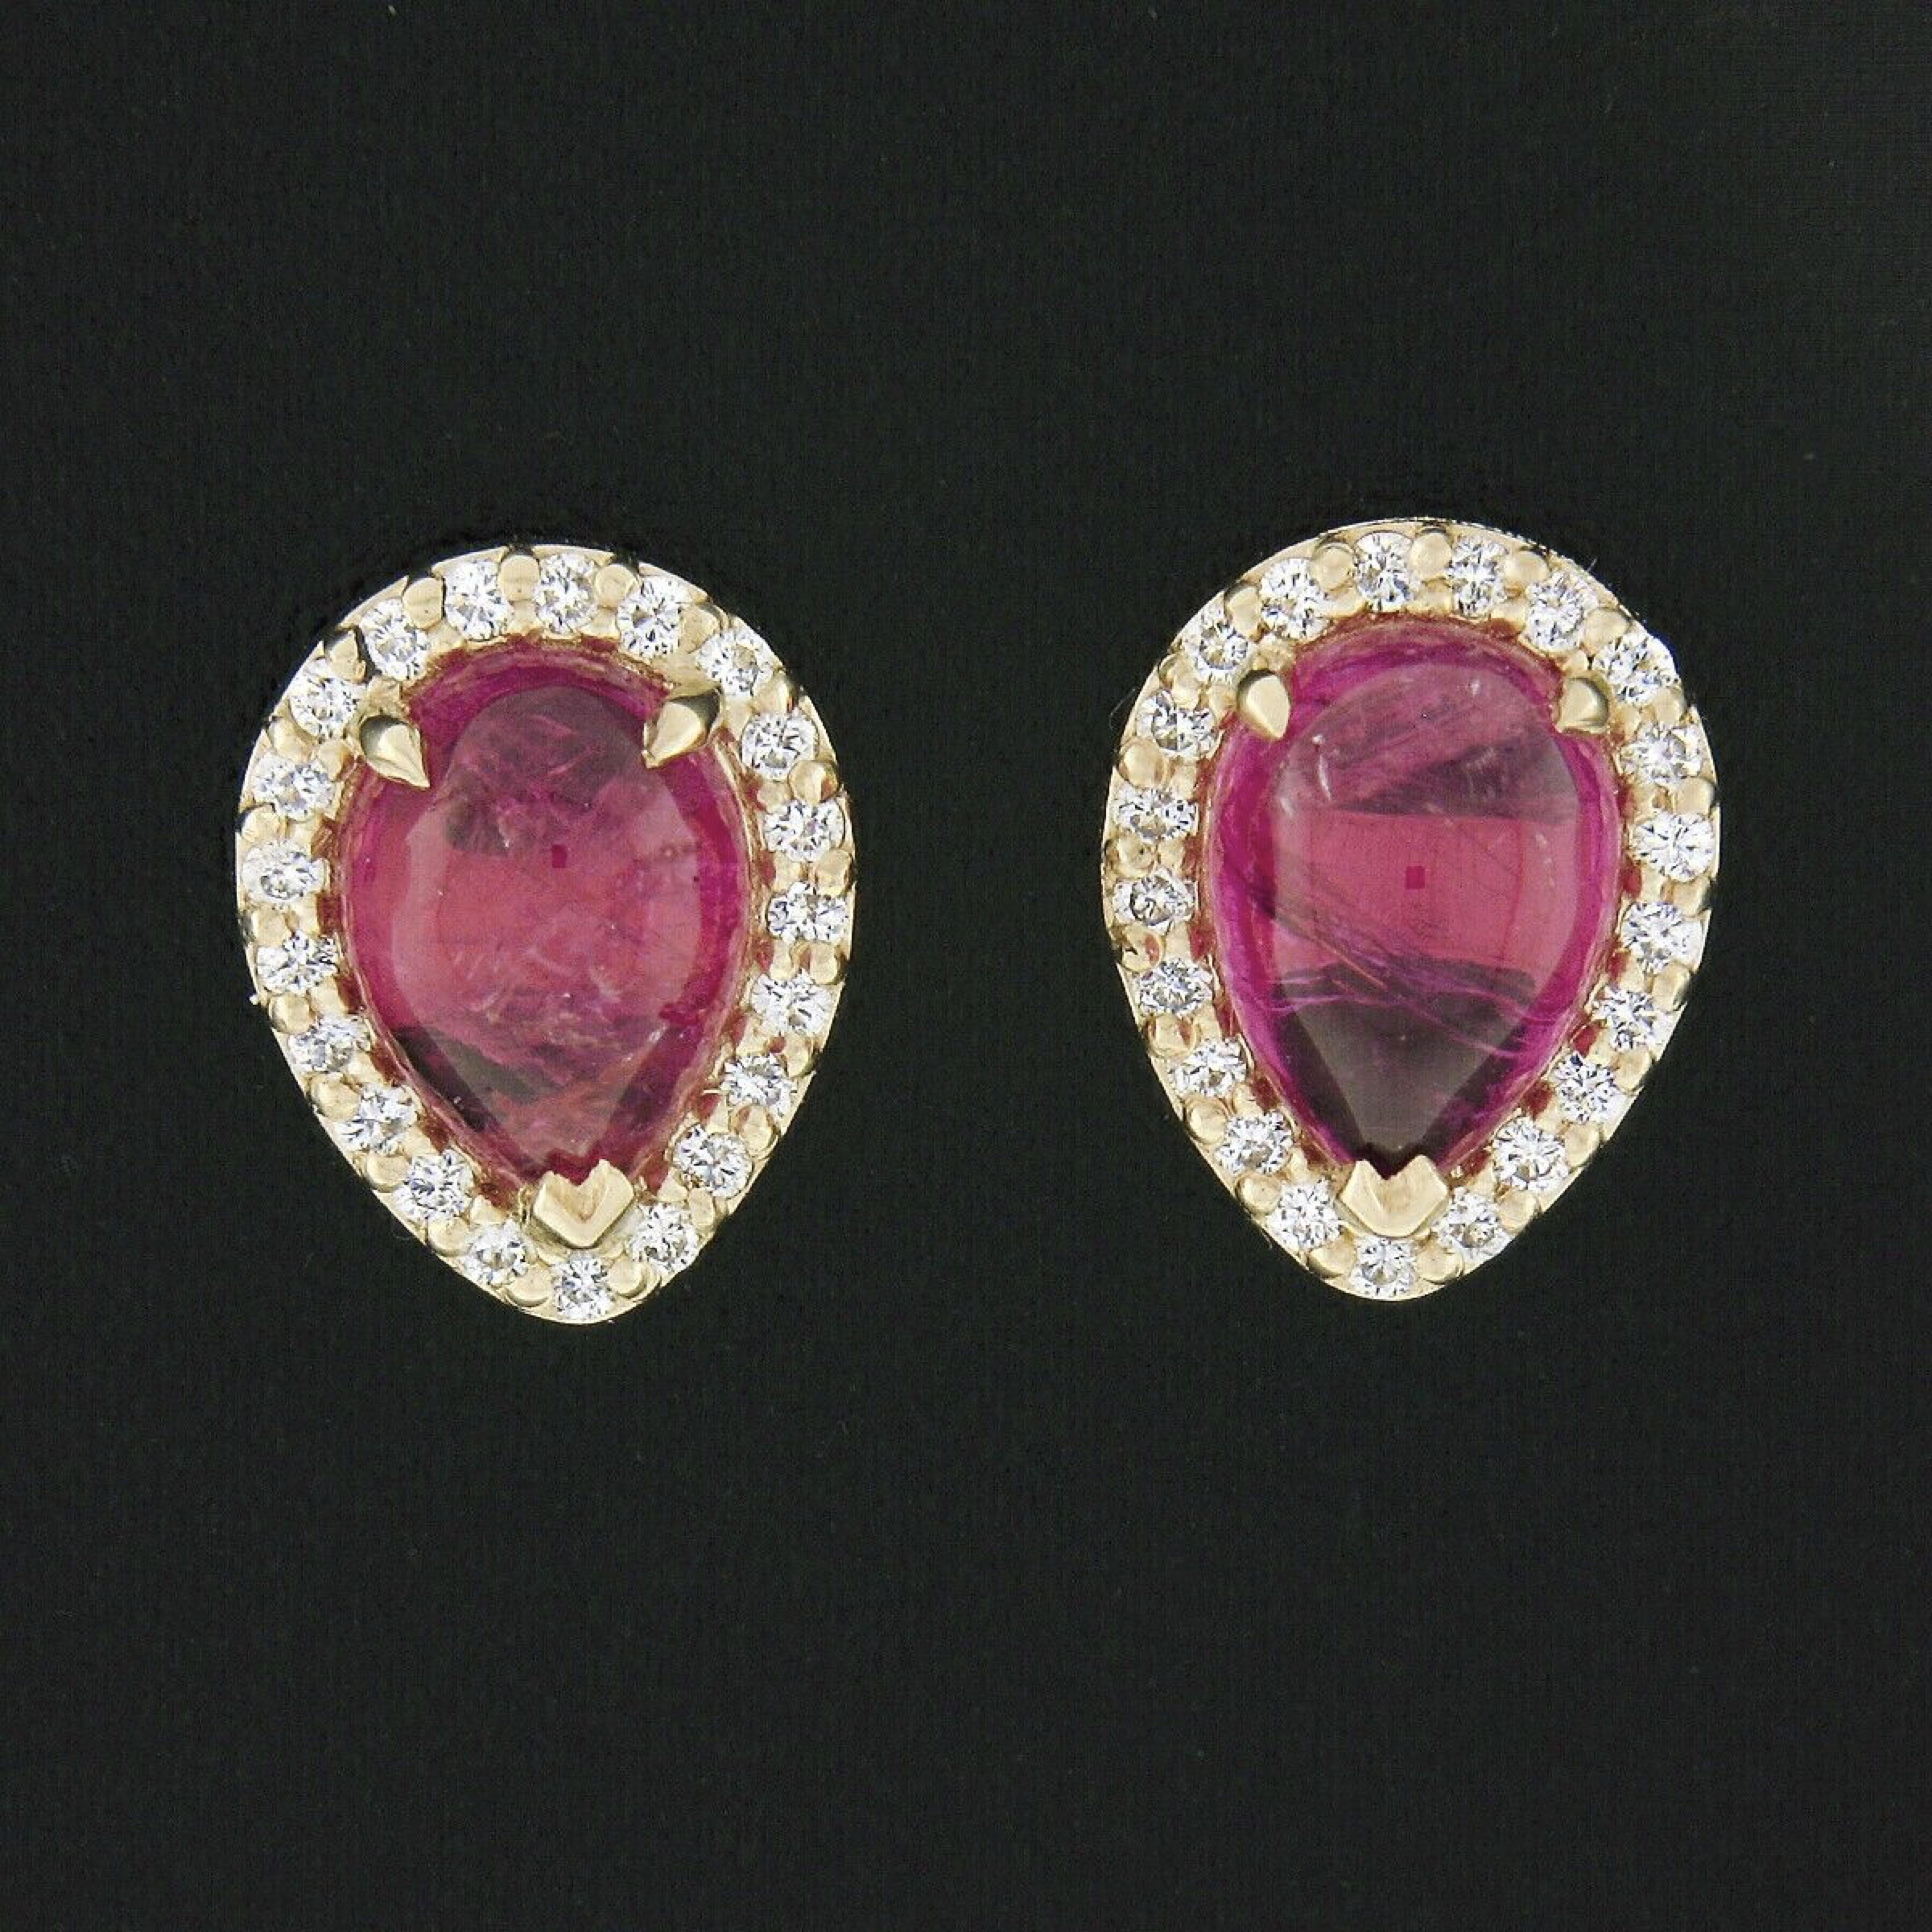 These beautiful custom made stud earrings are newly crafted in solid 14k yellow gold and feature a pair of stunning, pear cabochon cut rubies with a matching and super attractive pinkish-red color with no indications of heat treatment. The fine